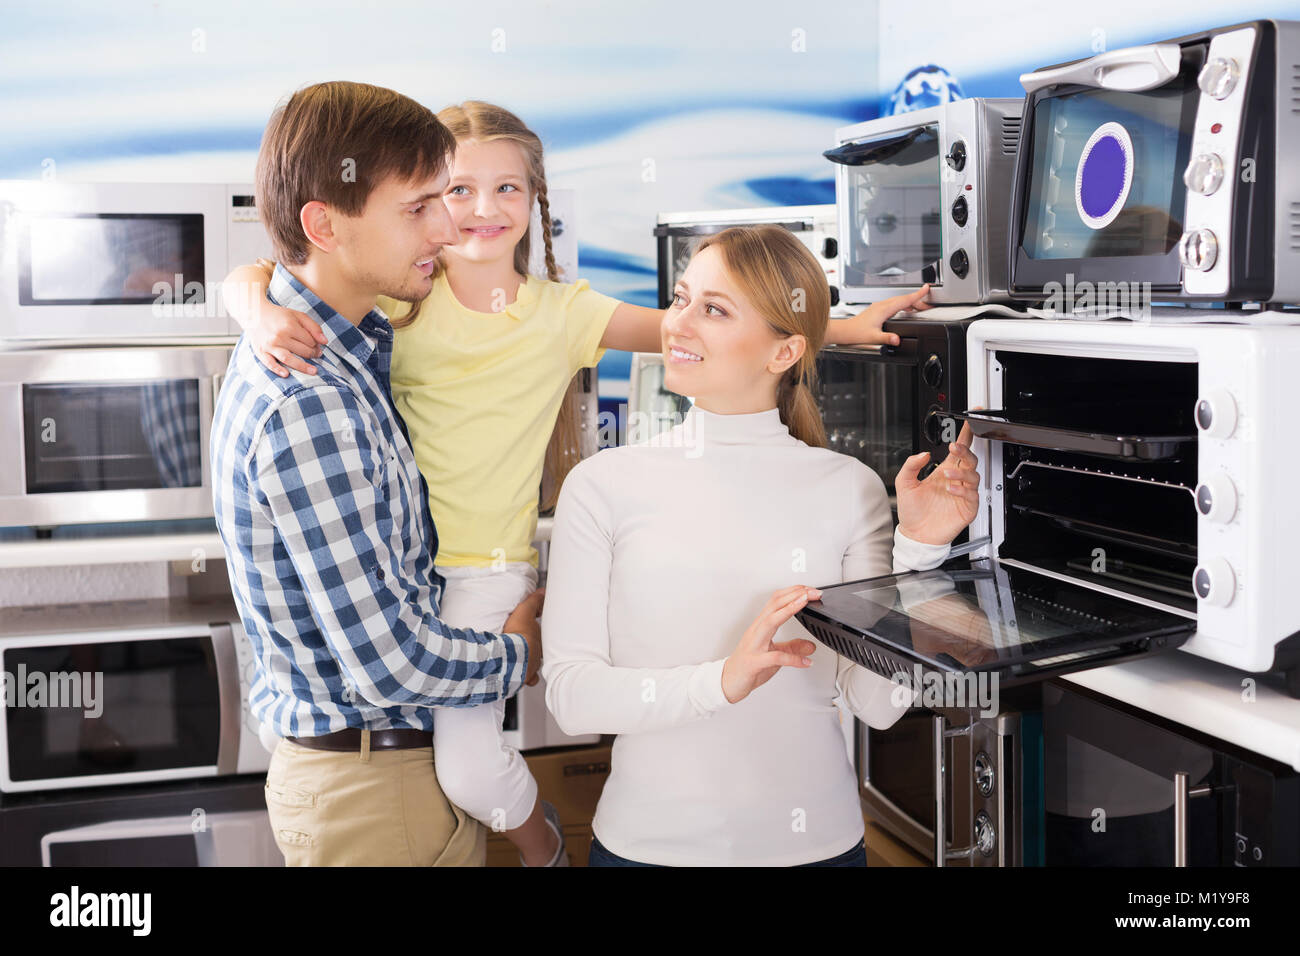 Positivel young man and woman with girl buying modern microwave in store with electronics Stock Photo